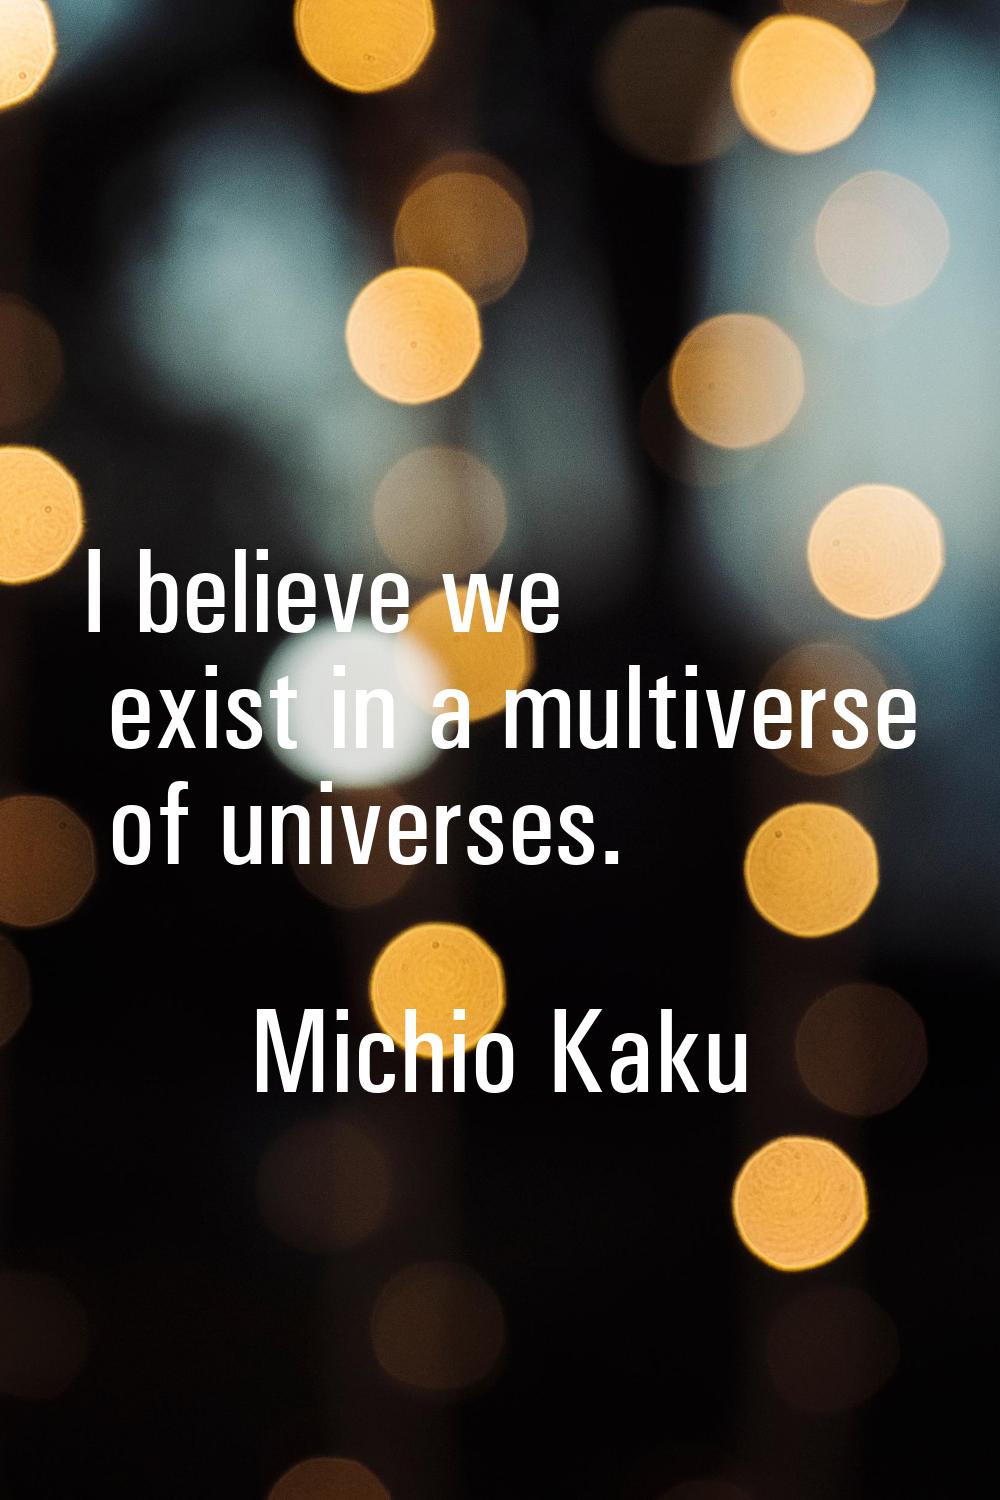 I believe we exist in a multiverse of universes.